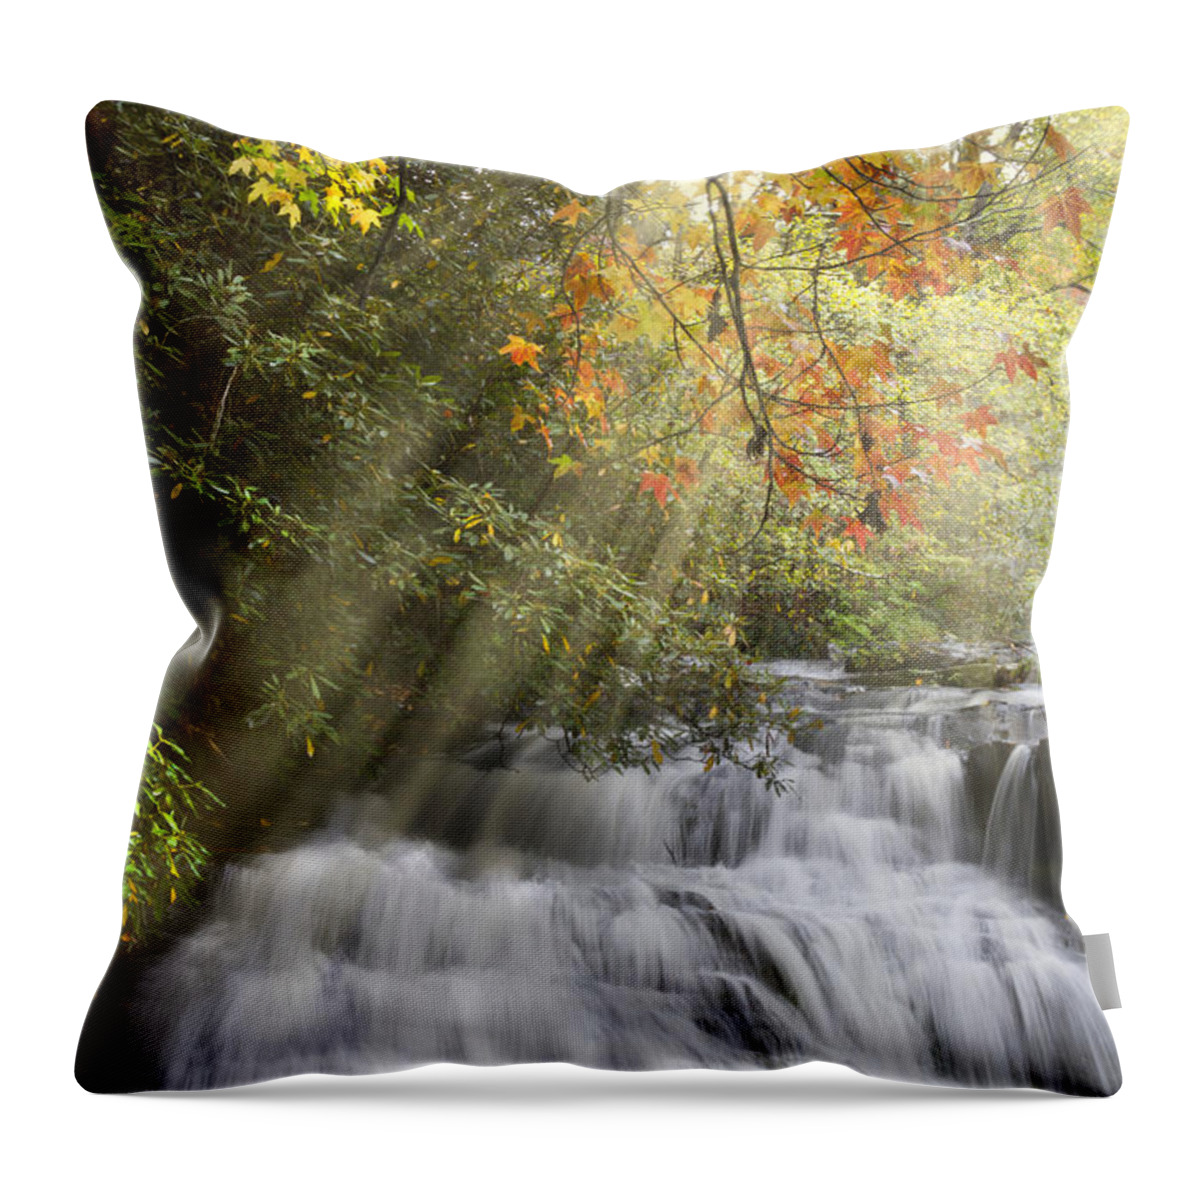 Appalachia Throw Pillow featuring the photograph Misty Falls at Coker Creek by Debra and Dave Vanderlaan